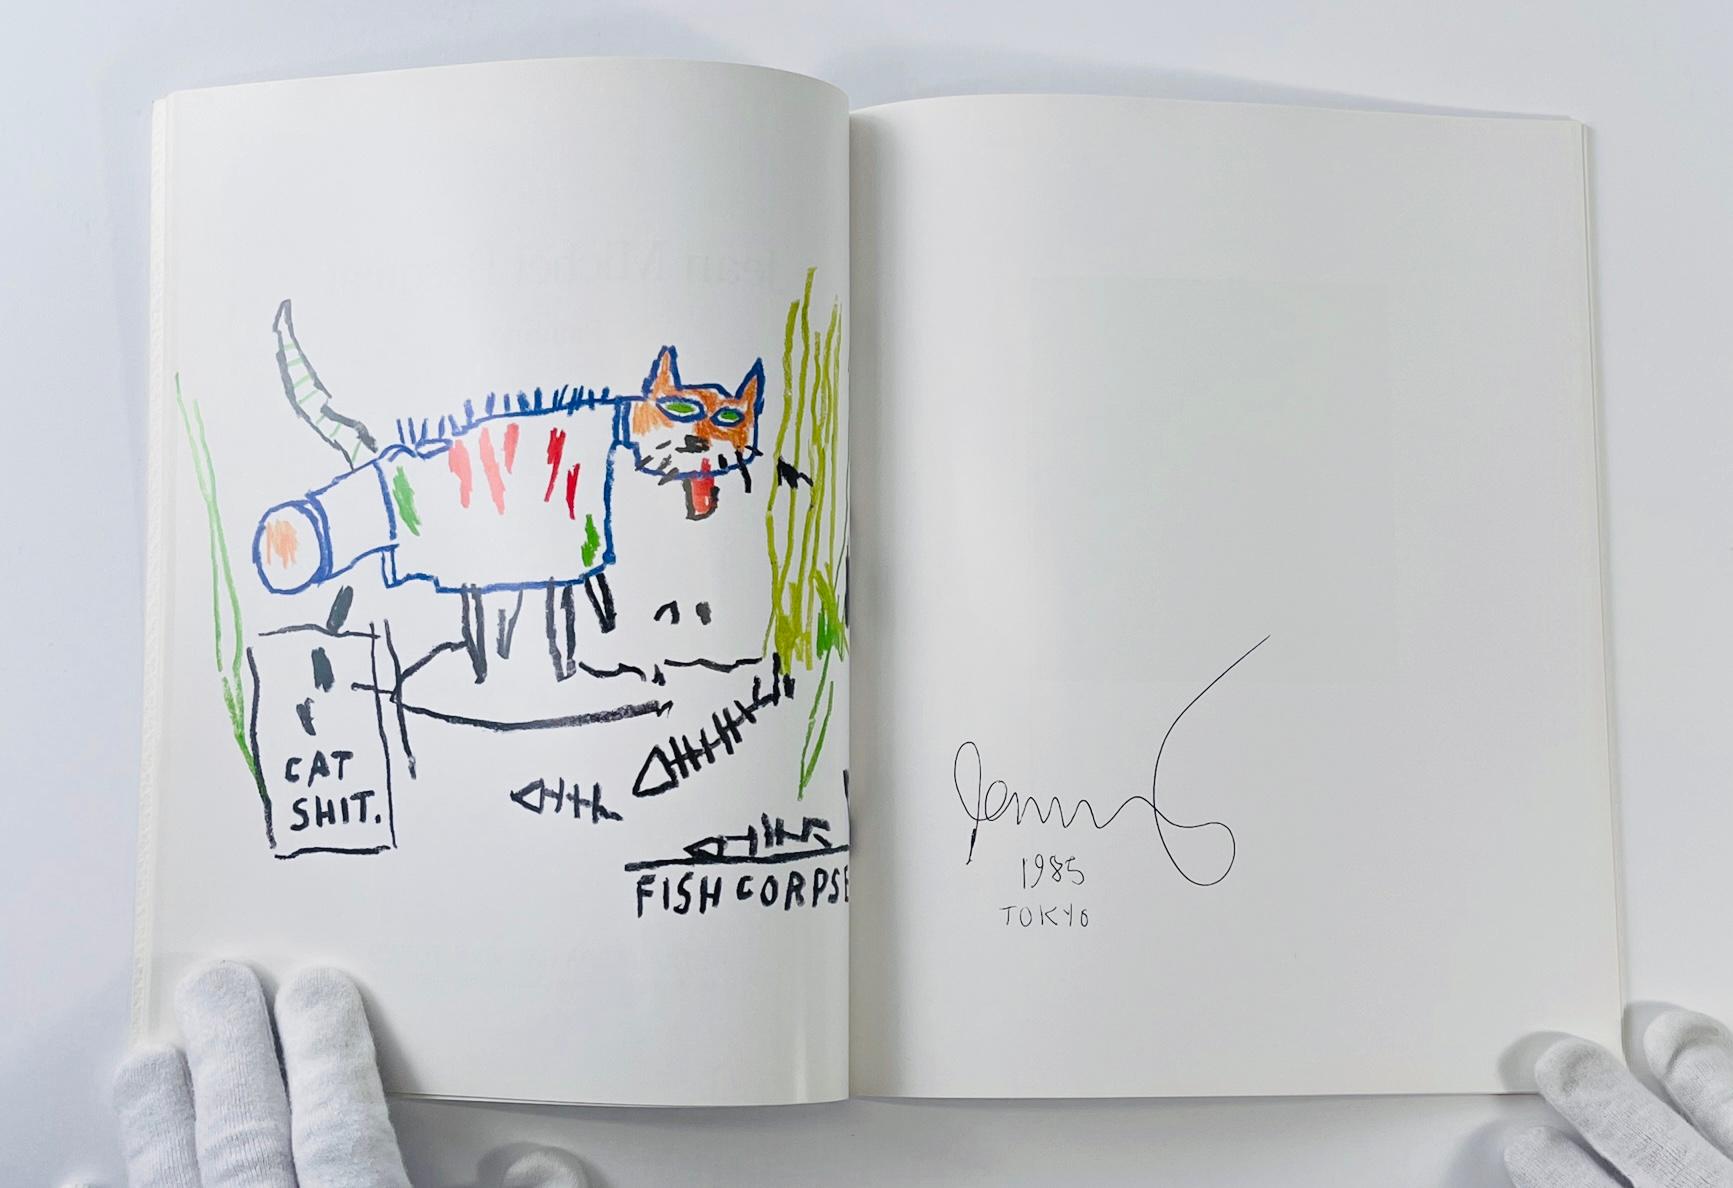 Jean Michel Basquiat: Paintings: Akira Ikeda Gallery, 1985:
Rare sought-after Basquiat exhibition catalog from 1985 published by Akira Ikeda Gallery, Tokyo. An exquisitely rendered Basquiat collectible produced during the artist's lifetime.  

1985